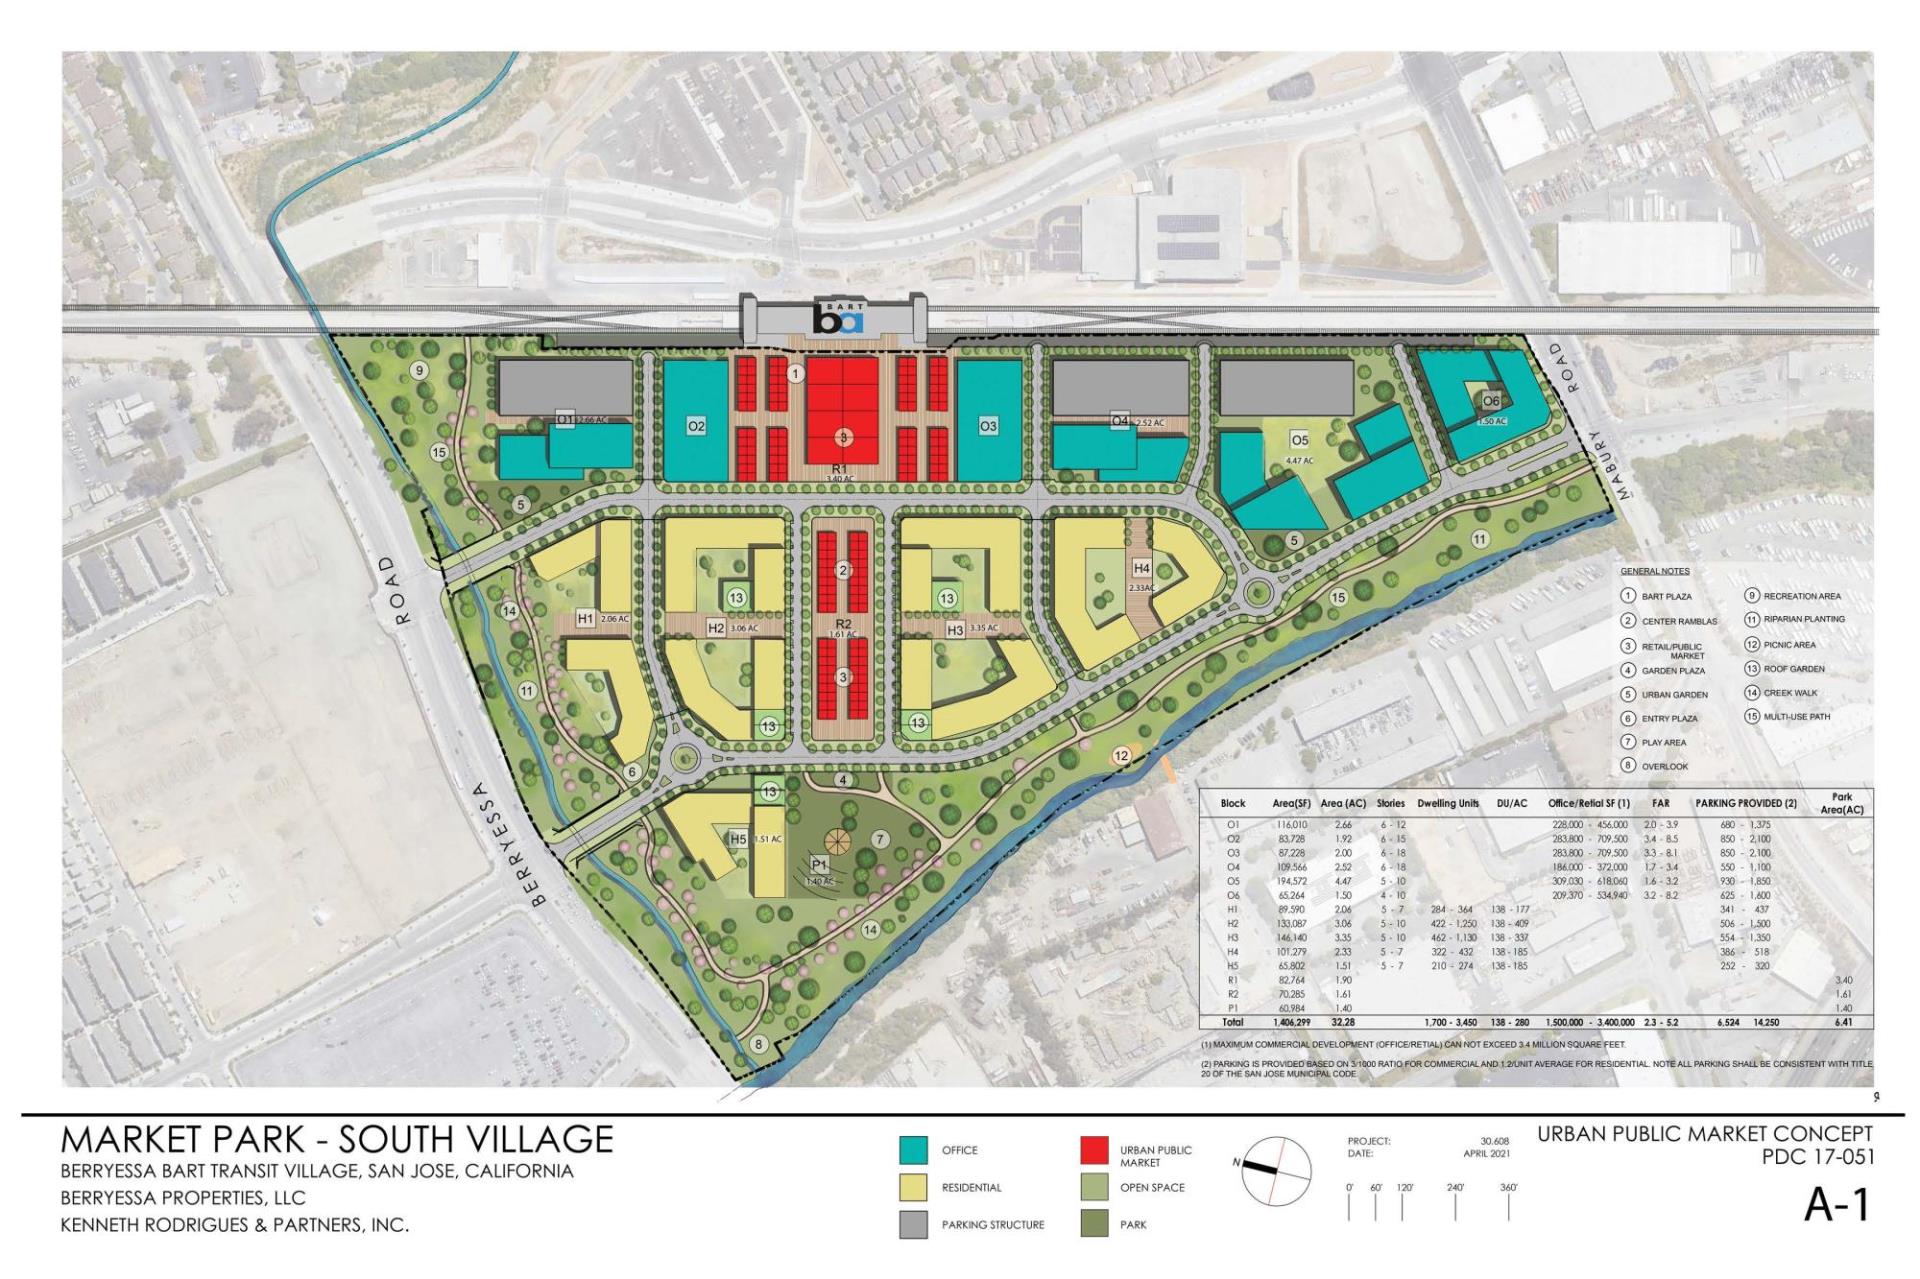 The concept map created by the both the developers and owners of the Flea Market site that shows what the property could look like with an urban village if San Jose approves its rezoning request. The Berryessa/North San Jose BART station is visible on the upper part of the map.